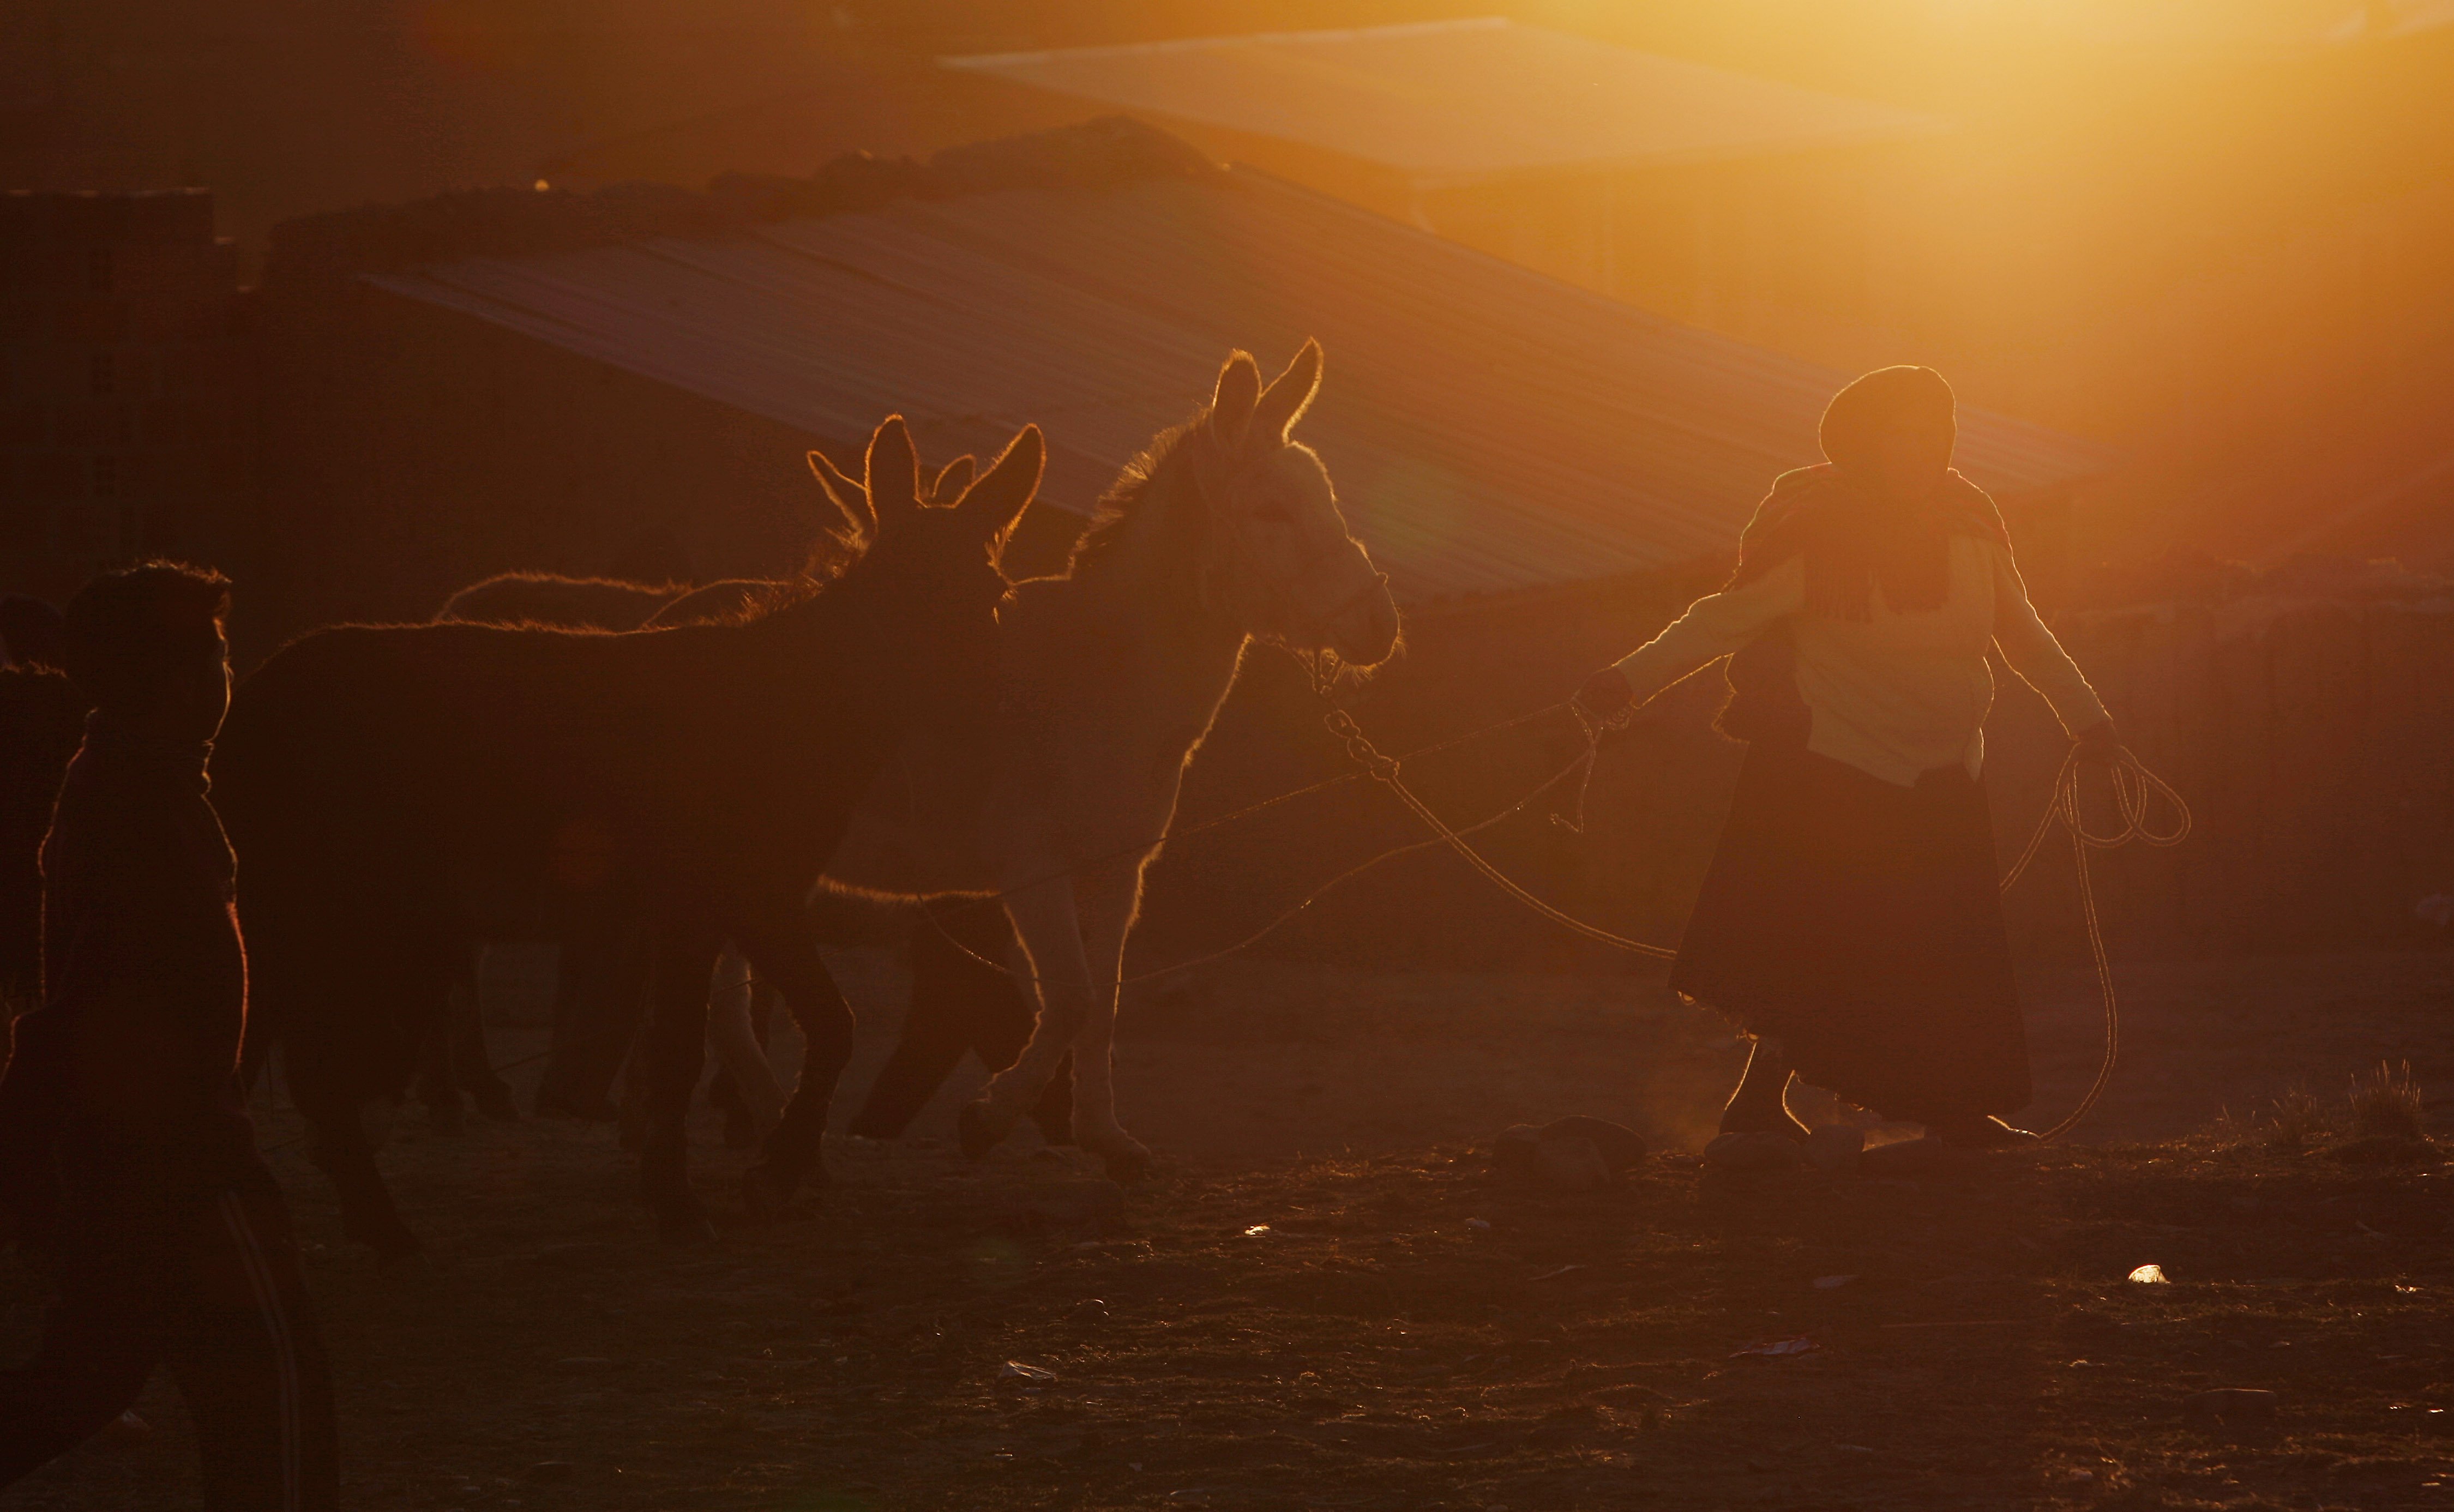 Apr. 12, 2014. A woman leads away her newly acquired donkeys through the grounds of the  Feria de Ramos,  or Palm Fair in El Alto, Bolivia, Saturday, The annual three day livestock fair takes place every Palm Sunday weekend and is a Holy Week, or Easter tradition.